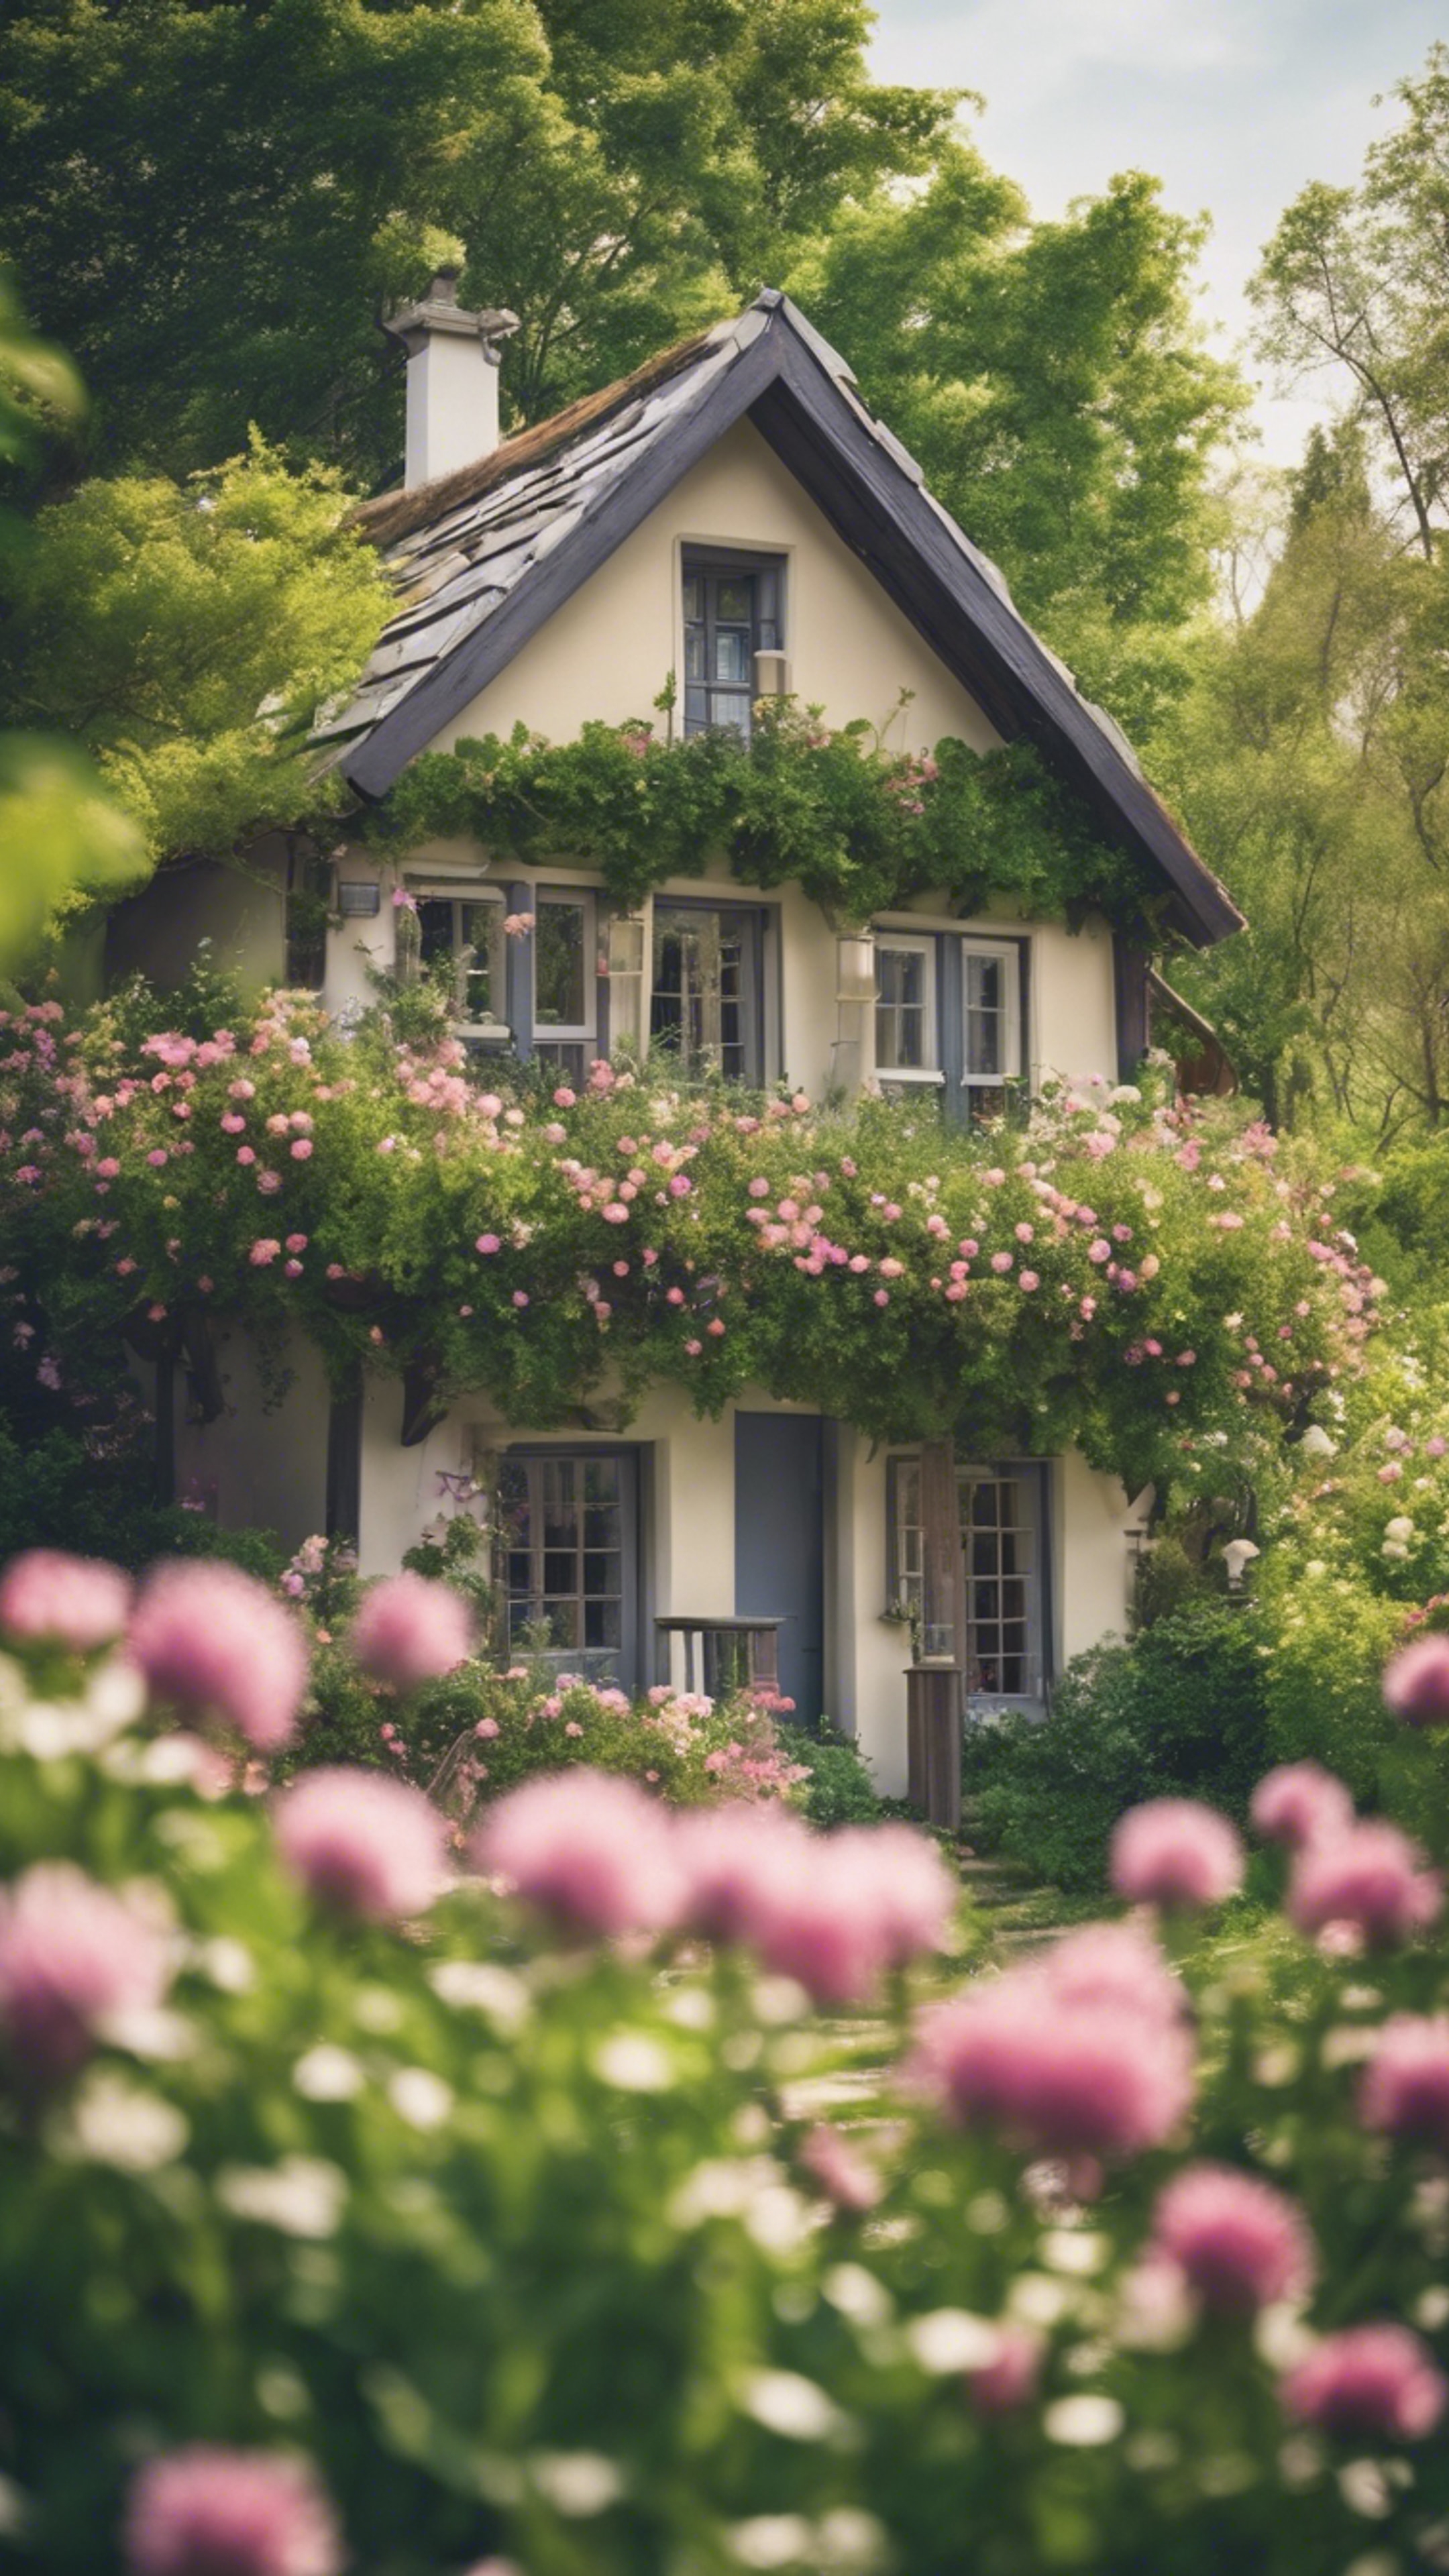 A picturesque scene of a quaint little cottage surrounded by a burst of spring flowers and new green foliage. Hintergrund[ad9cdb560dce44d082cc]